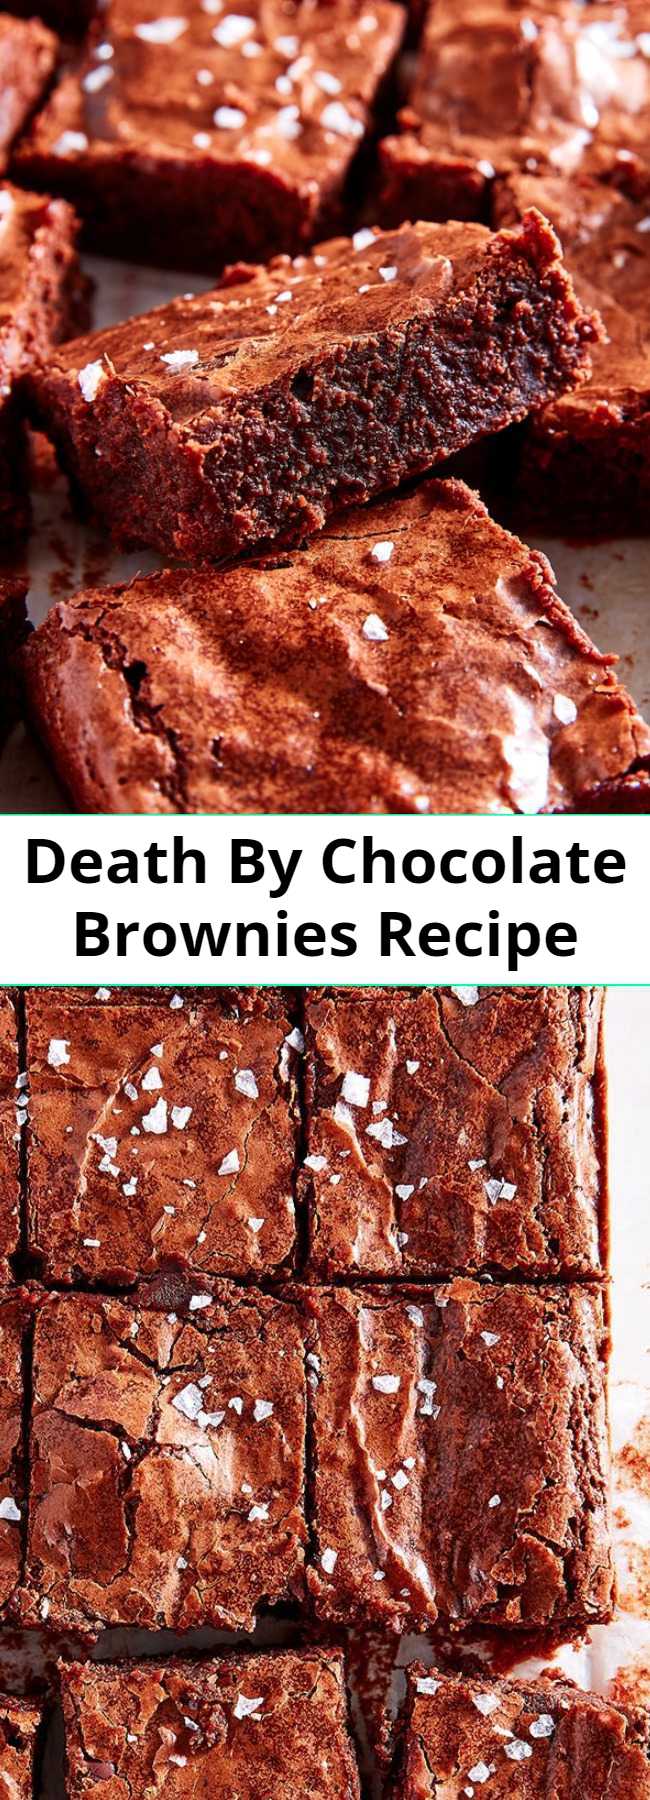 Death By Chocolate Brownies Recipe - Check out this easy recipe for the best ever chocolate brownies. Fudgy on the inside with that iconic crackly top, these brownies will not fail you. These mighttt be the best brownies you ever make.